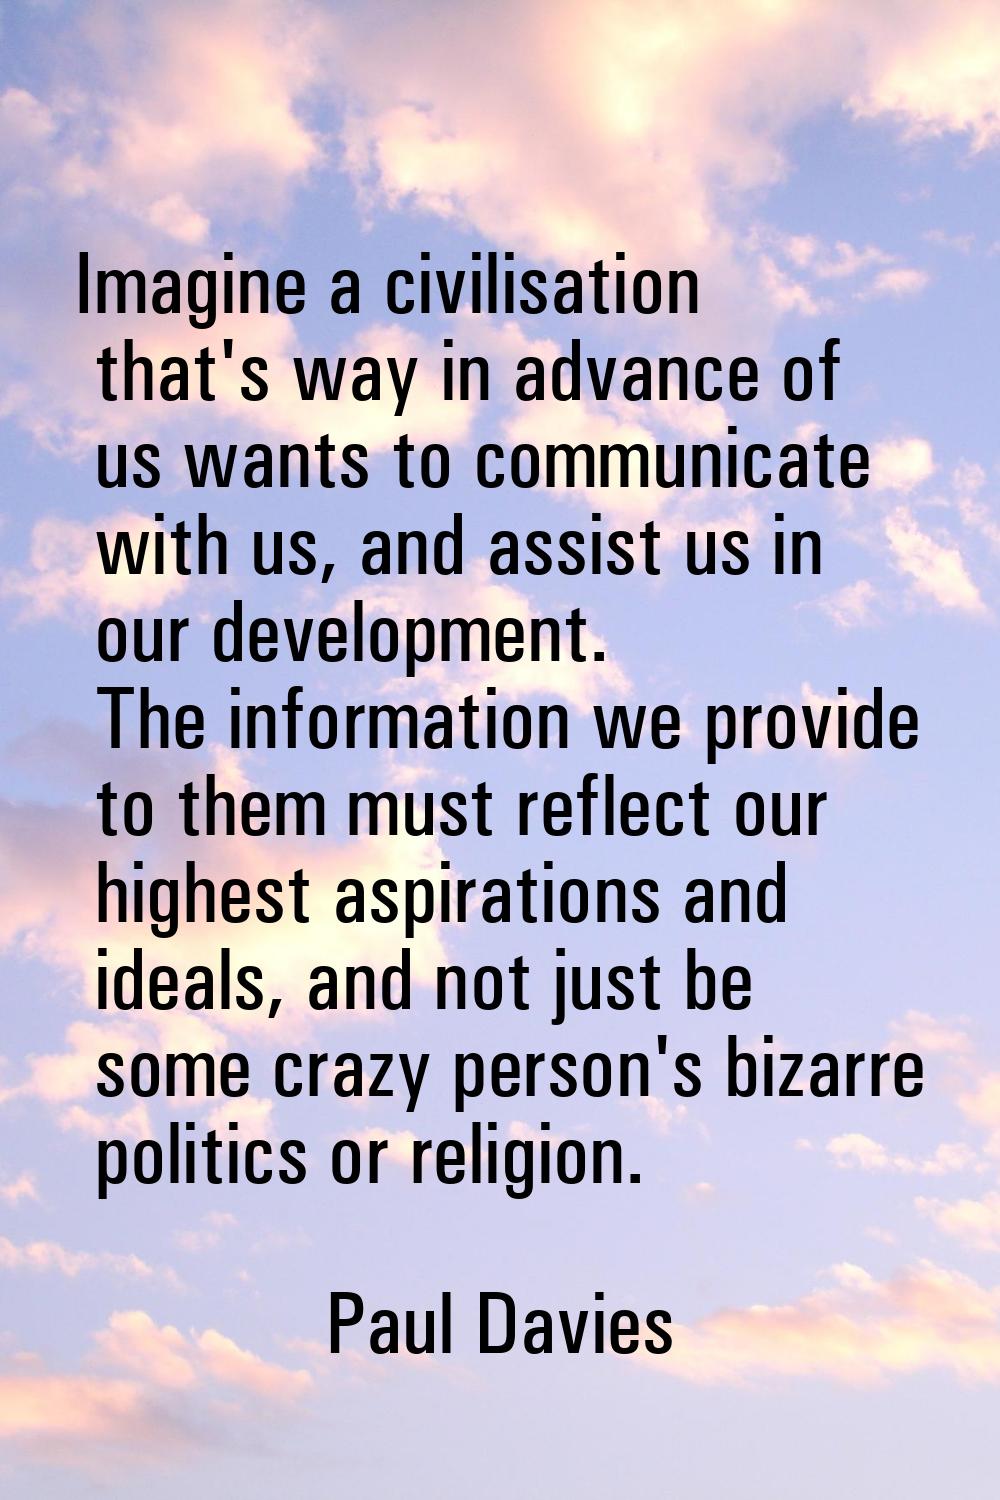 Imagine a civilisation that's way in advance of us wants to communicate with us, and assist us in o